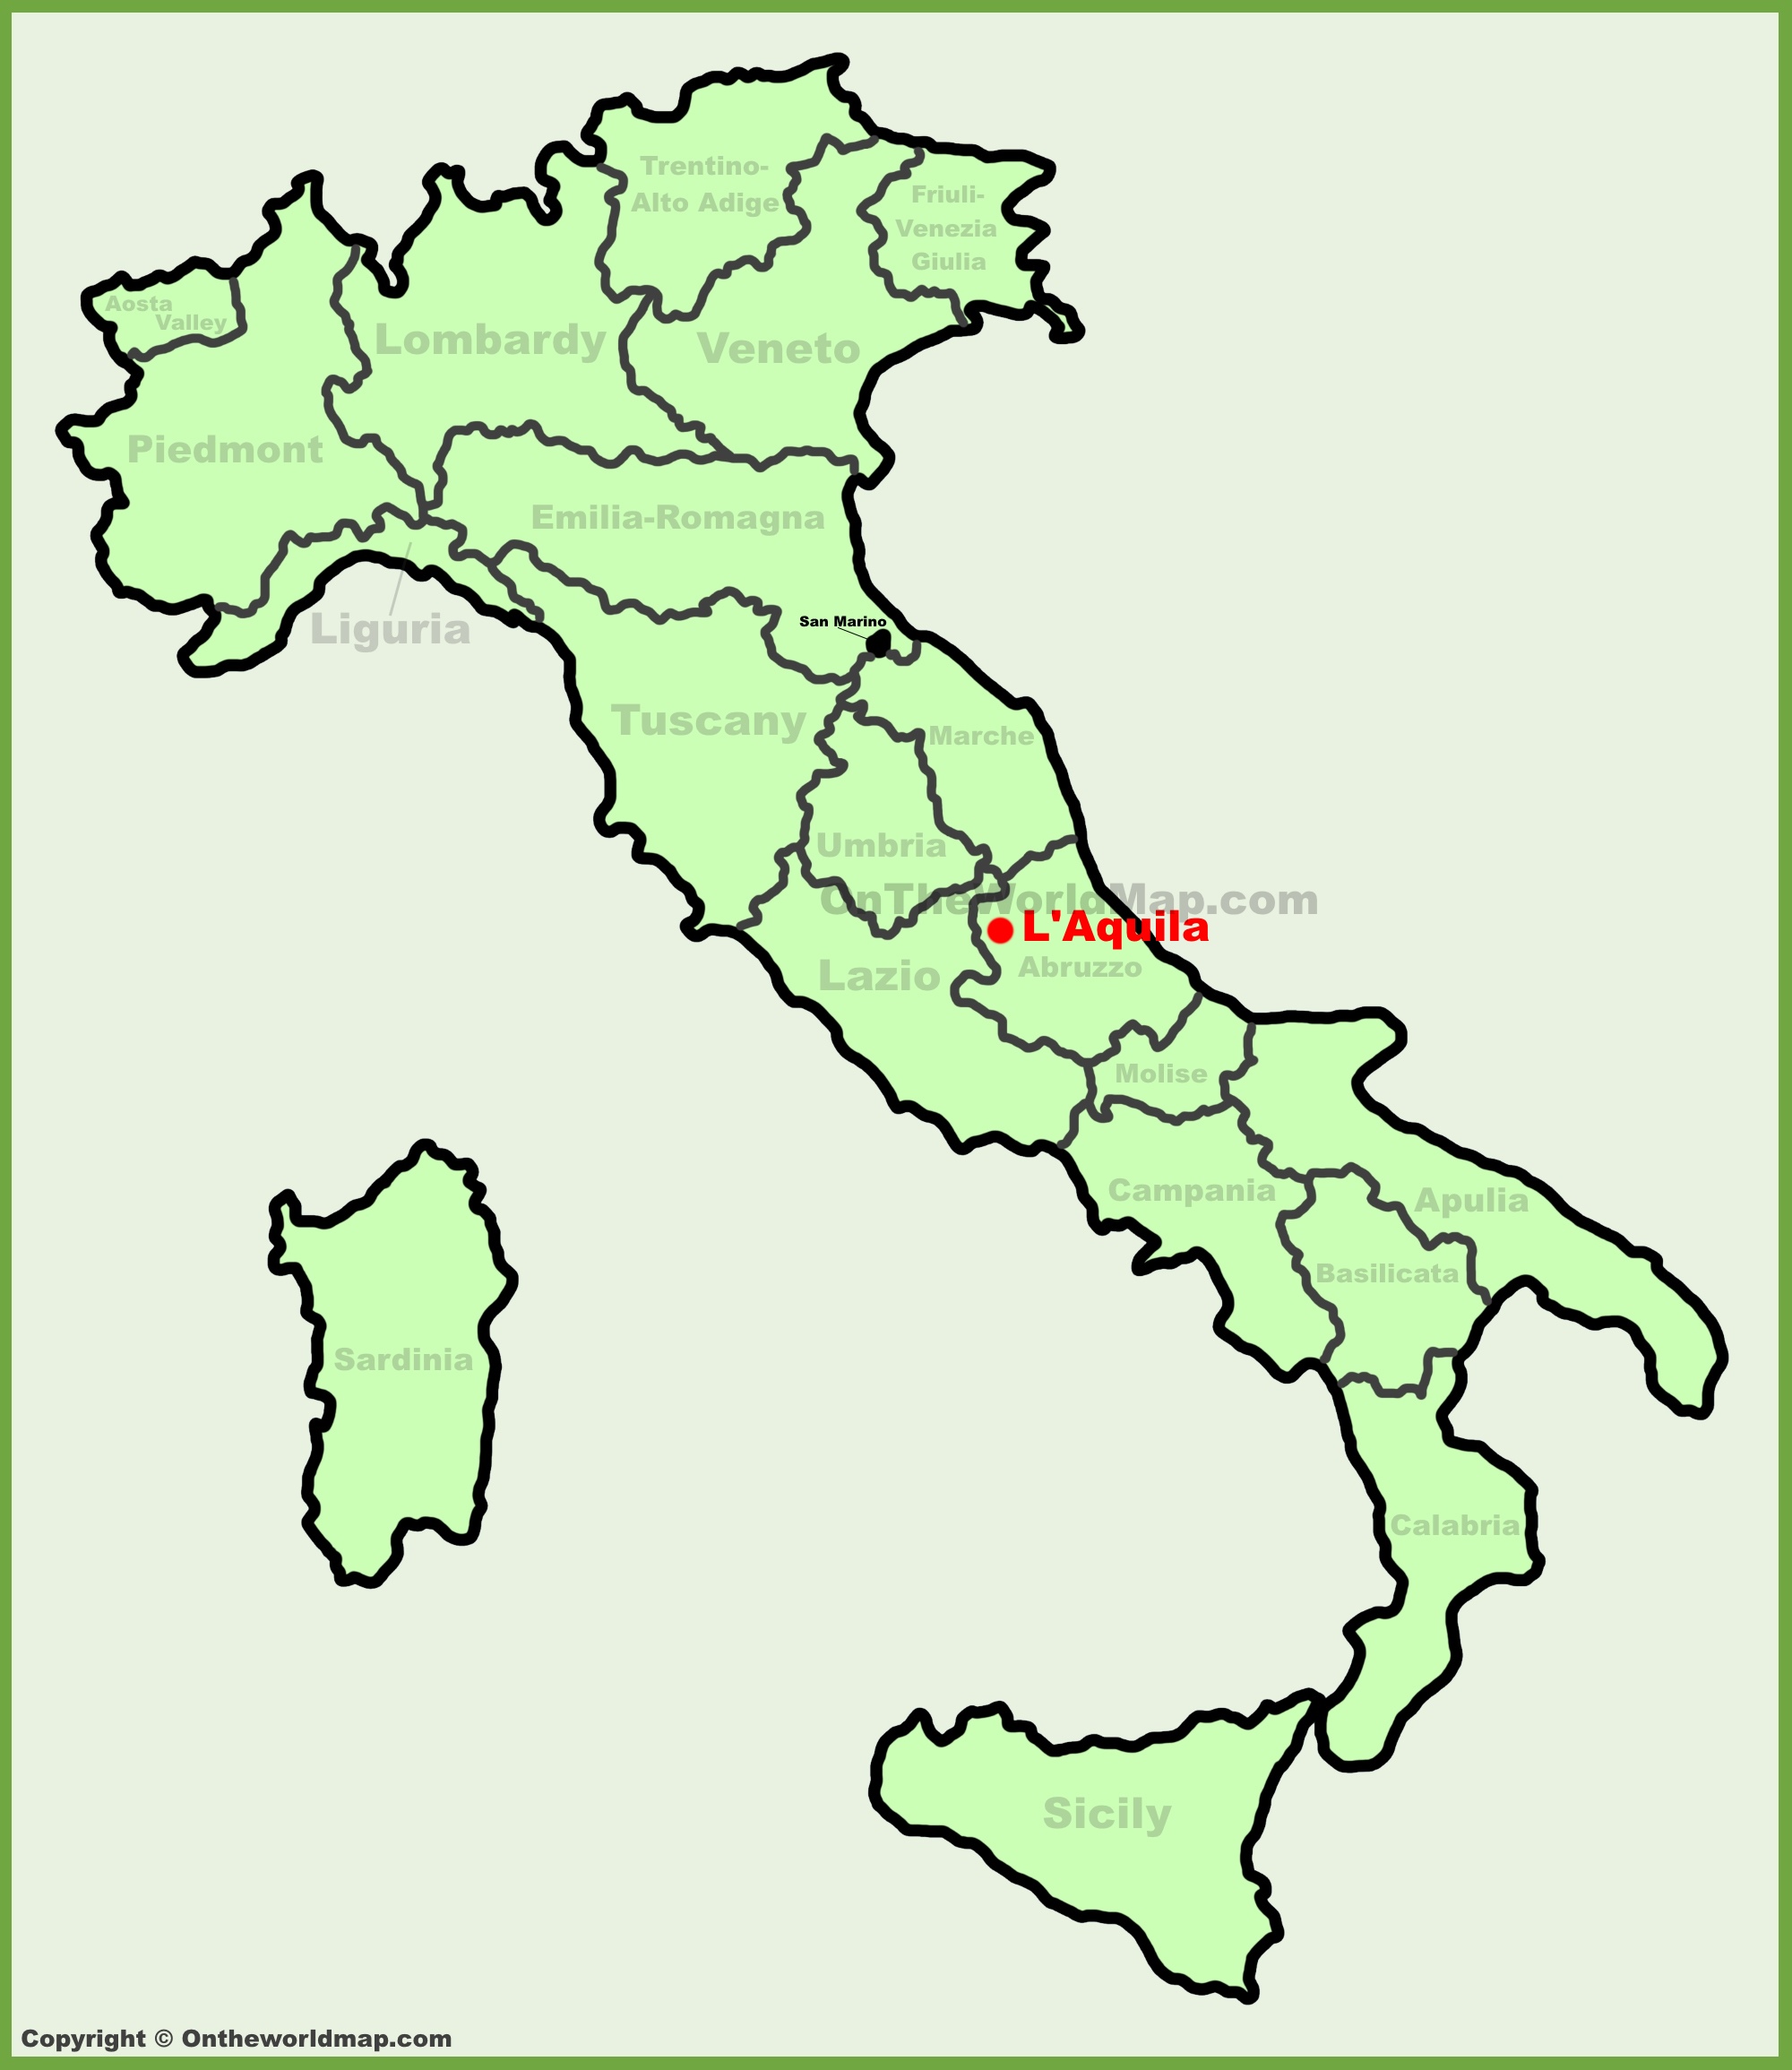 L Aquila Location On The Italy Map